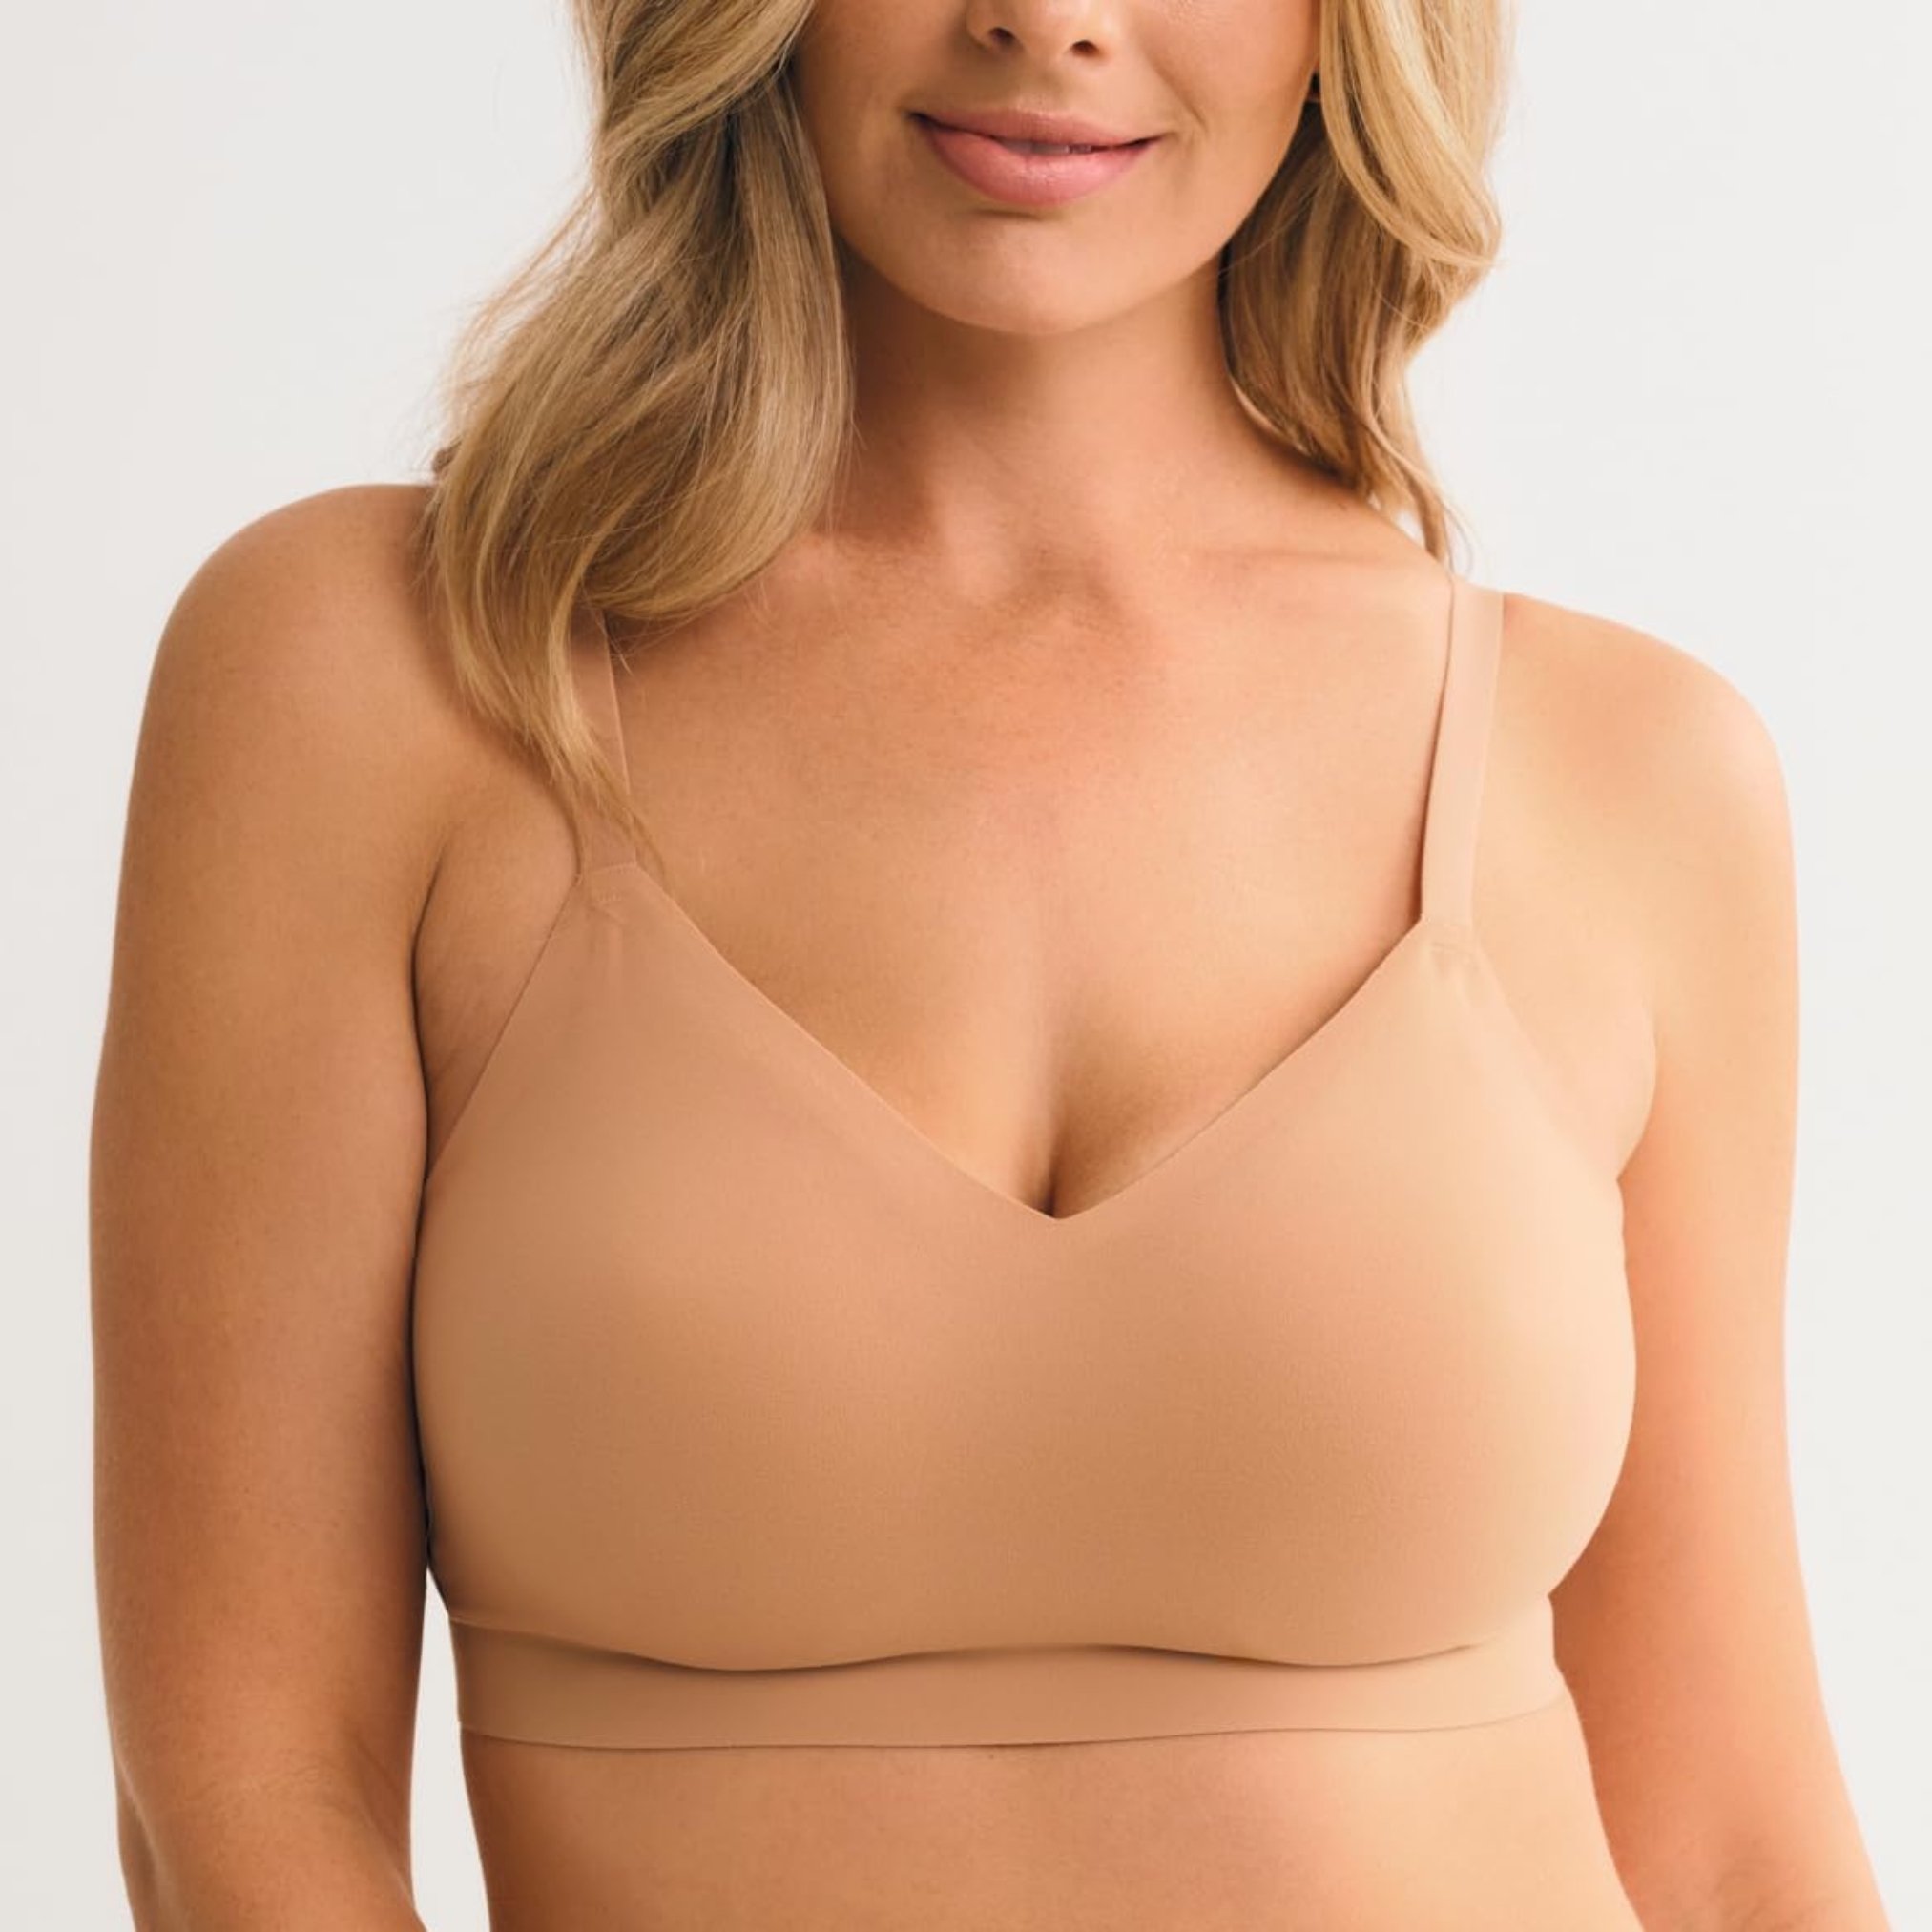 Welp, The Most Comfortable, Flattering, Wireless Bra is $35 On